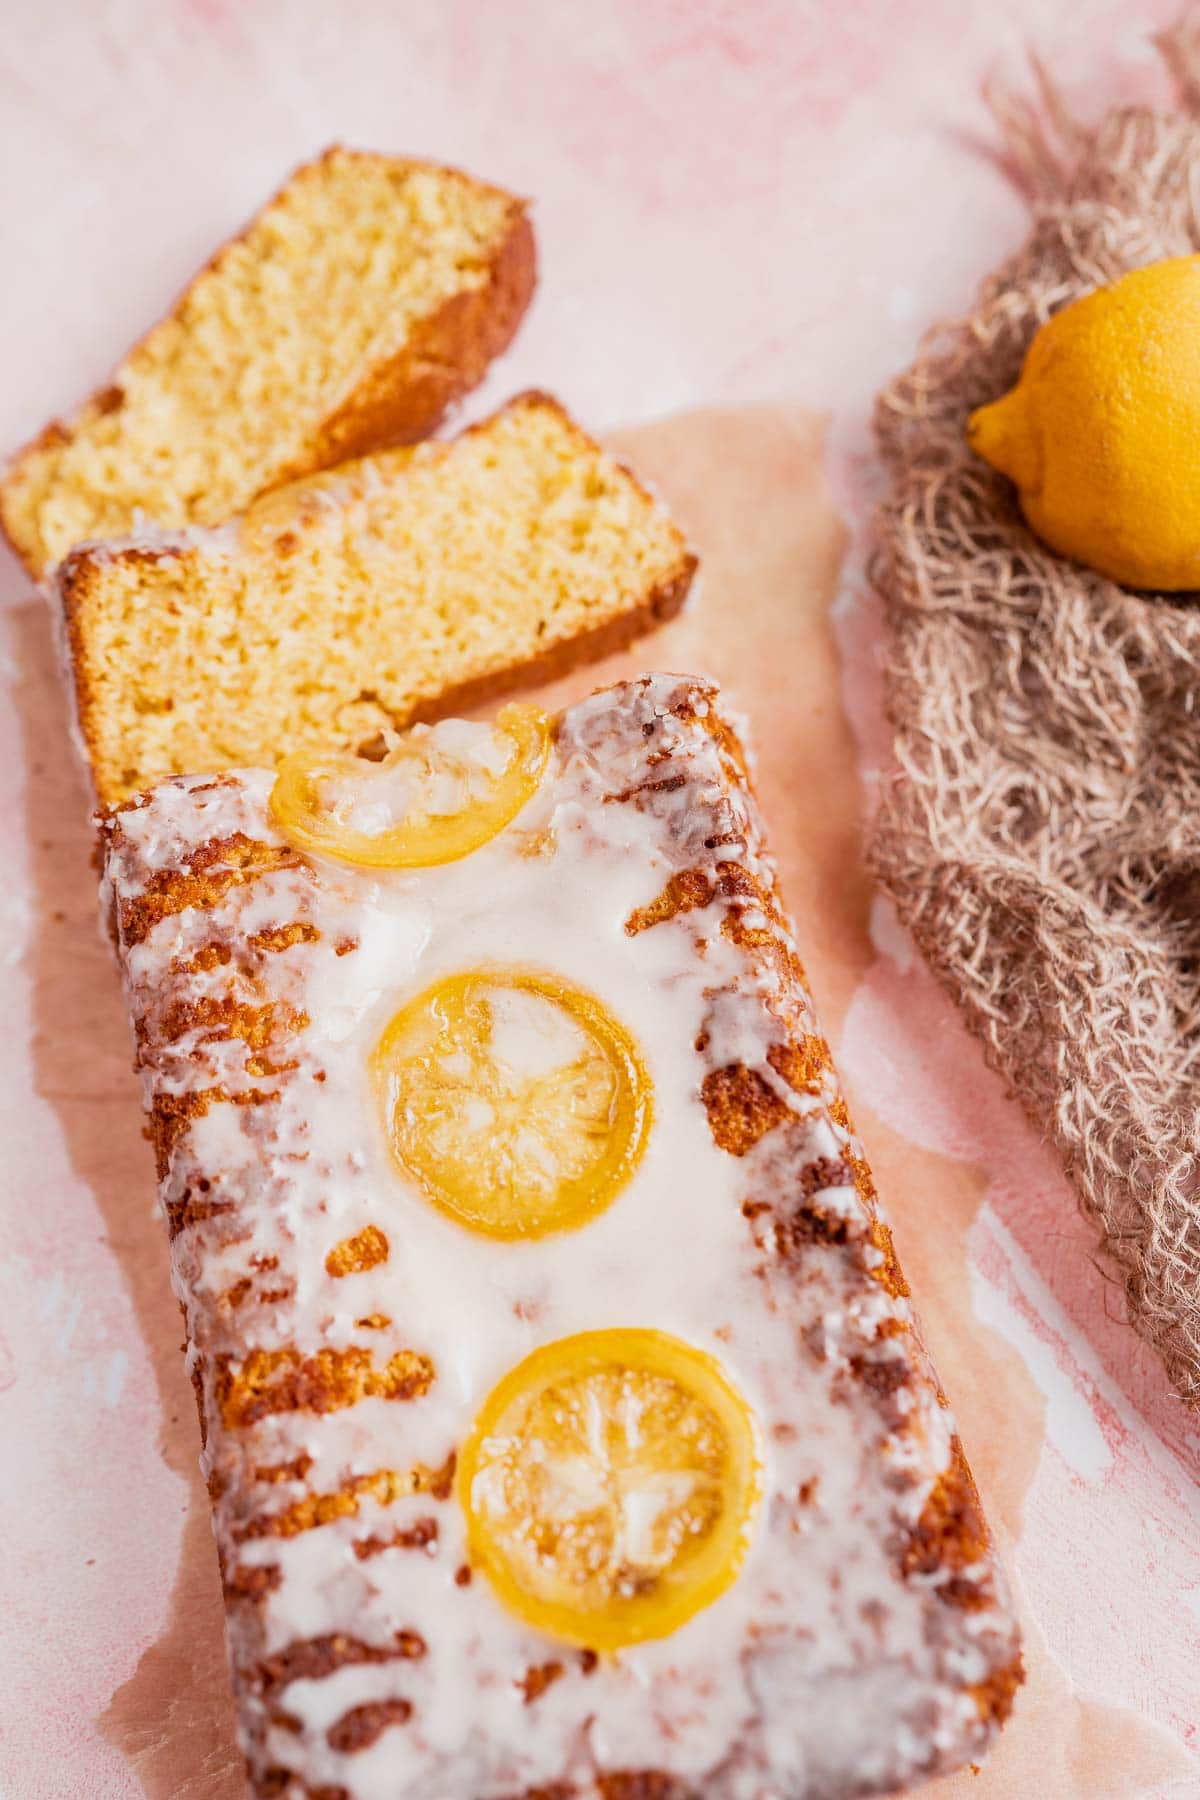 A sliced loaf cake topped with white icing and lemon slices.